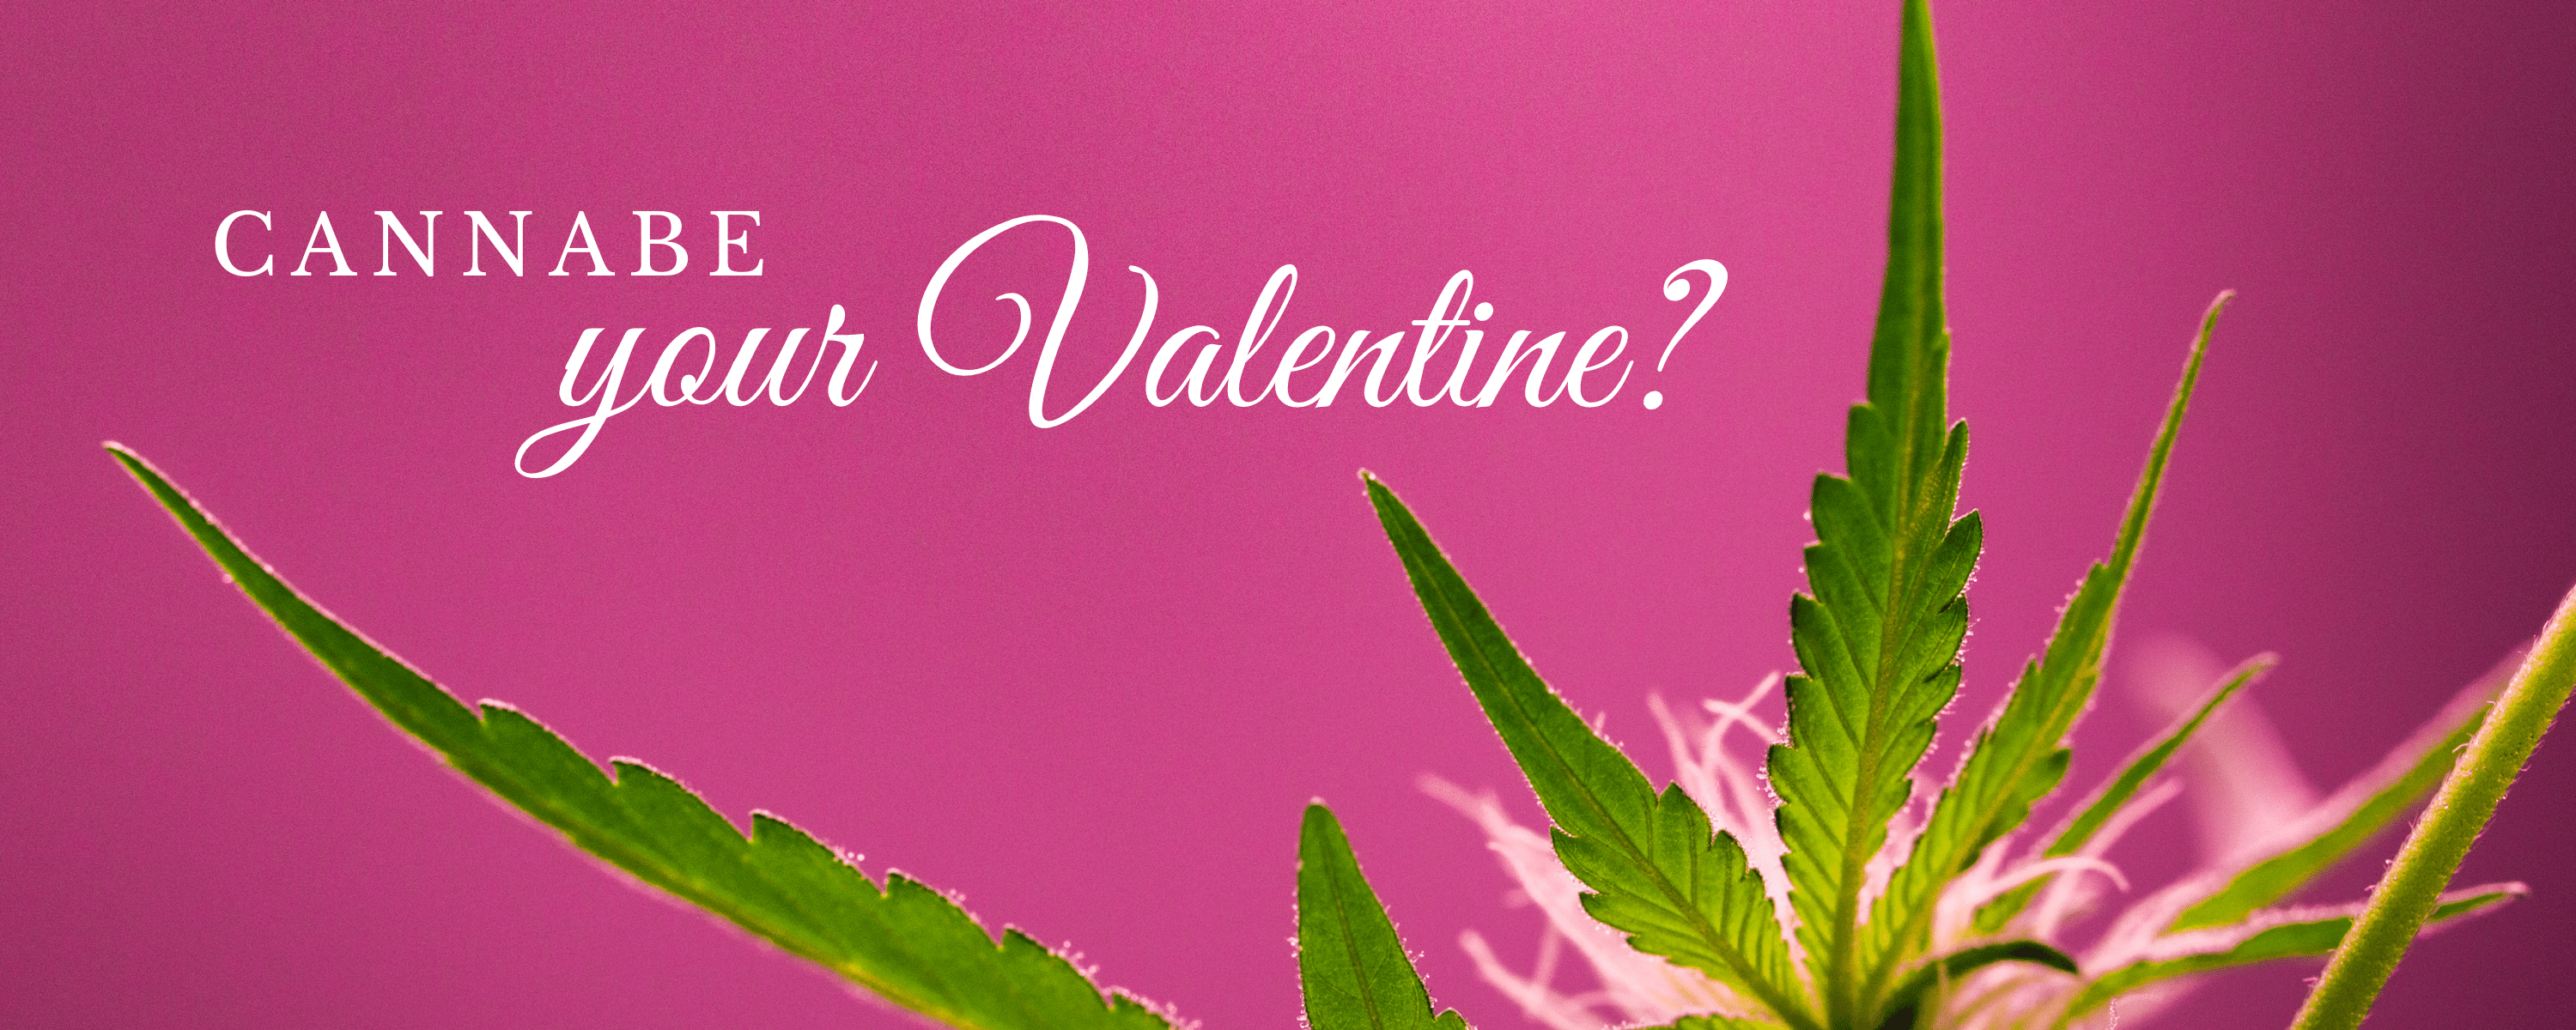 CNA Stores - CannaBe Your Valentine?